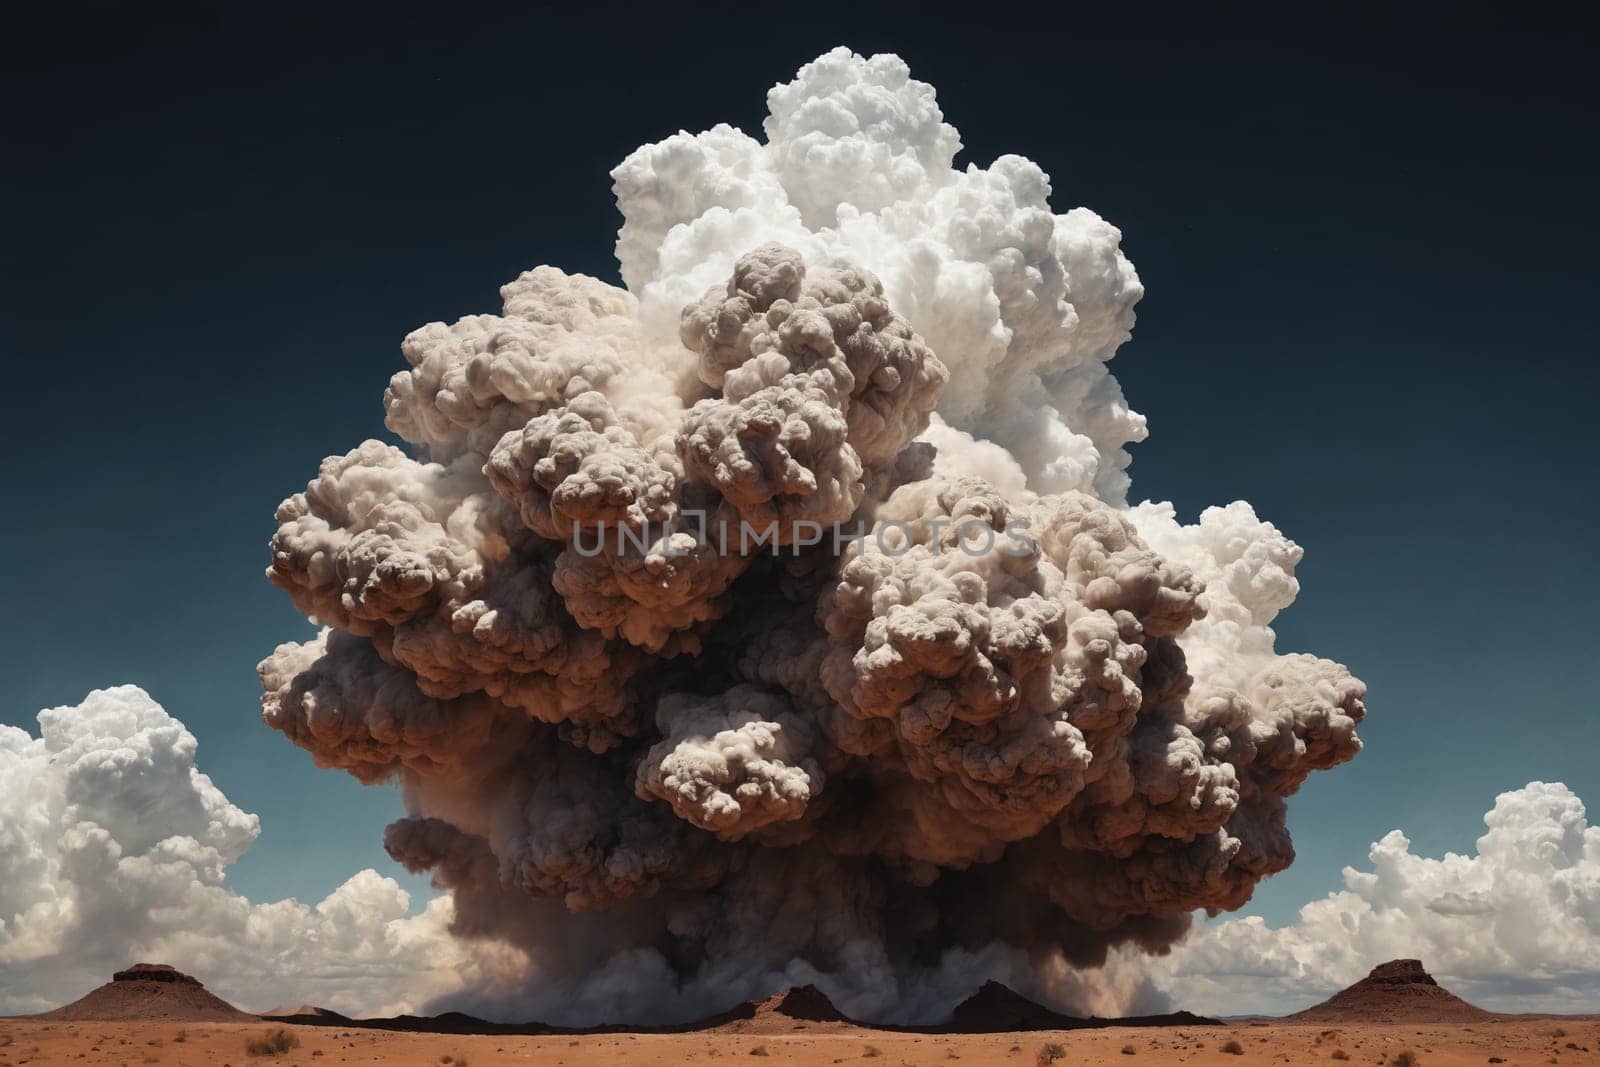 Nuclear Giant: The Largest Explosion and Its Towering Cloud by Andre1ns